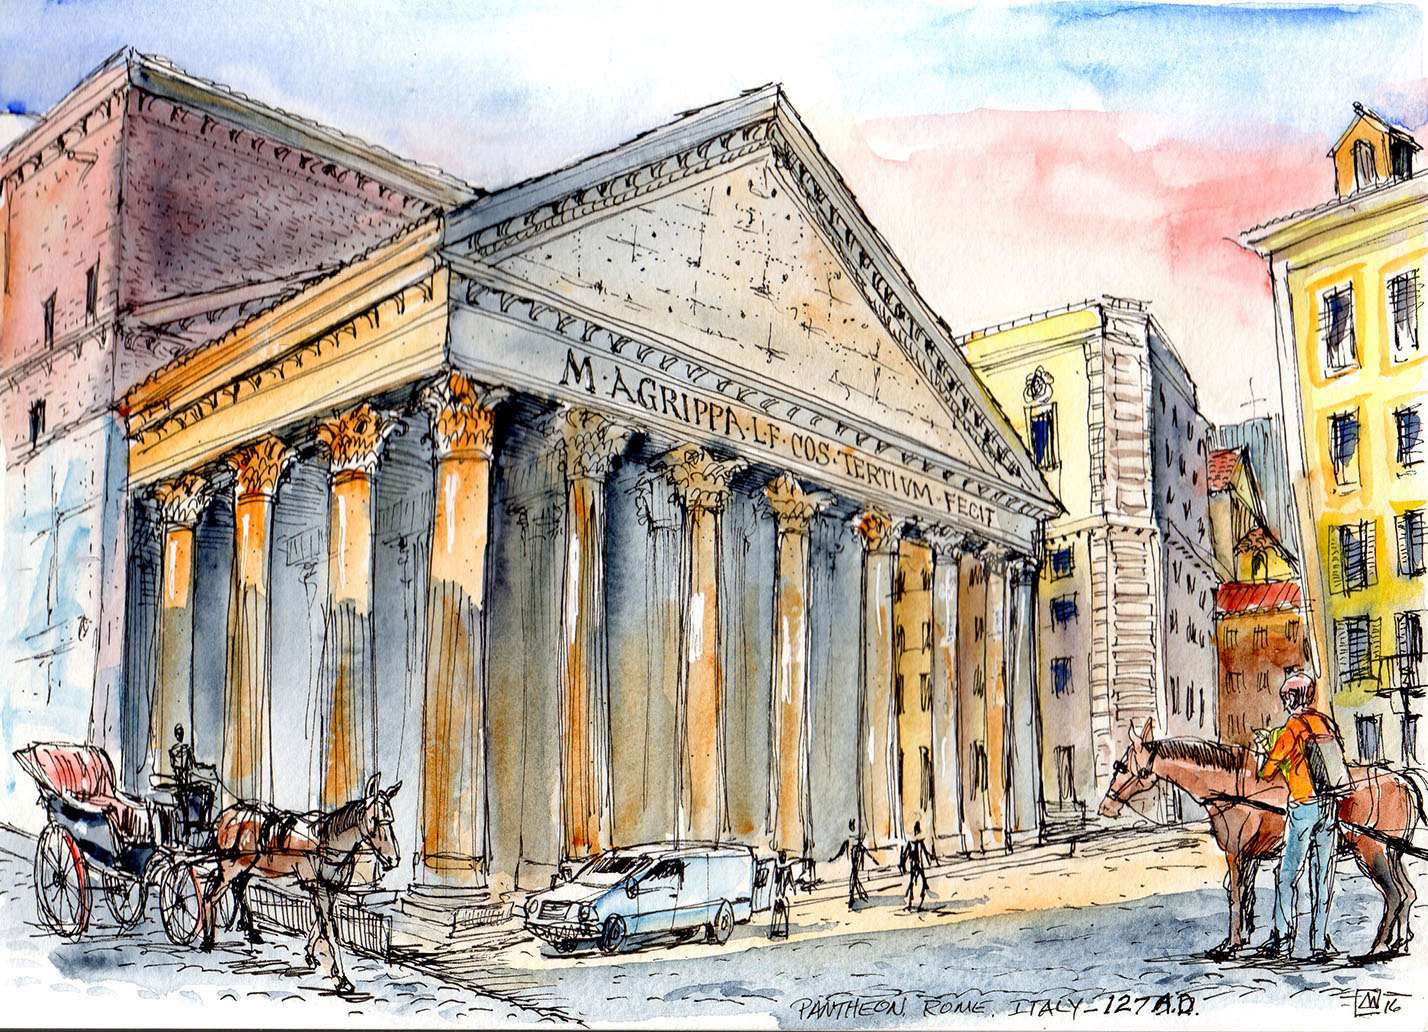 Digital download onlyWatercolor of the Pantheon in Rome